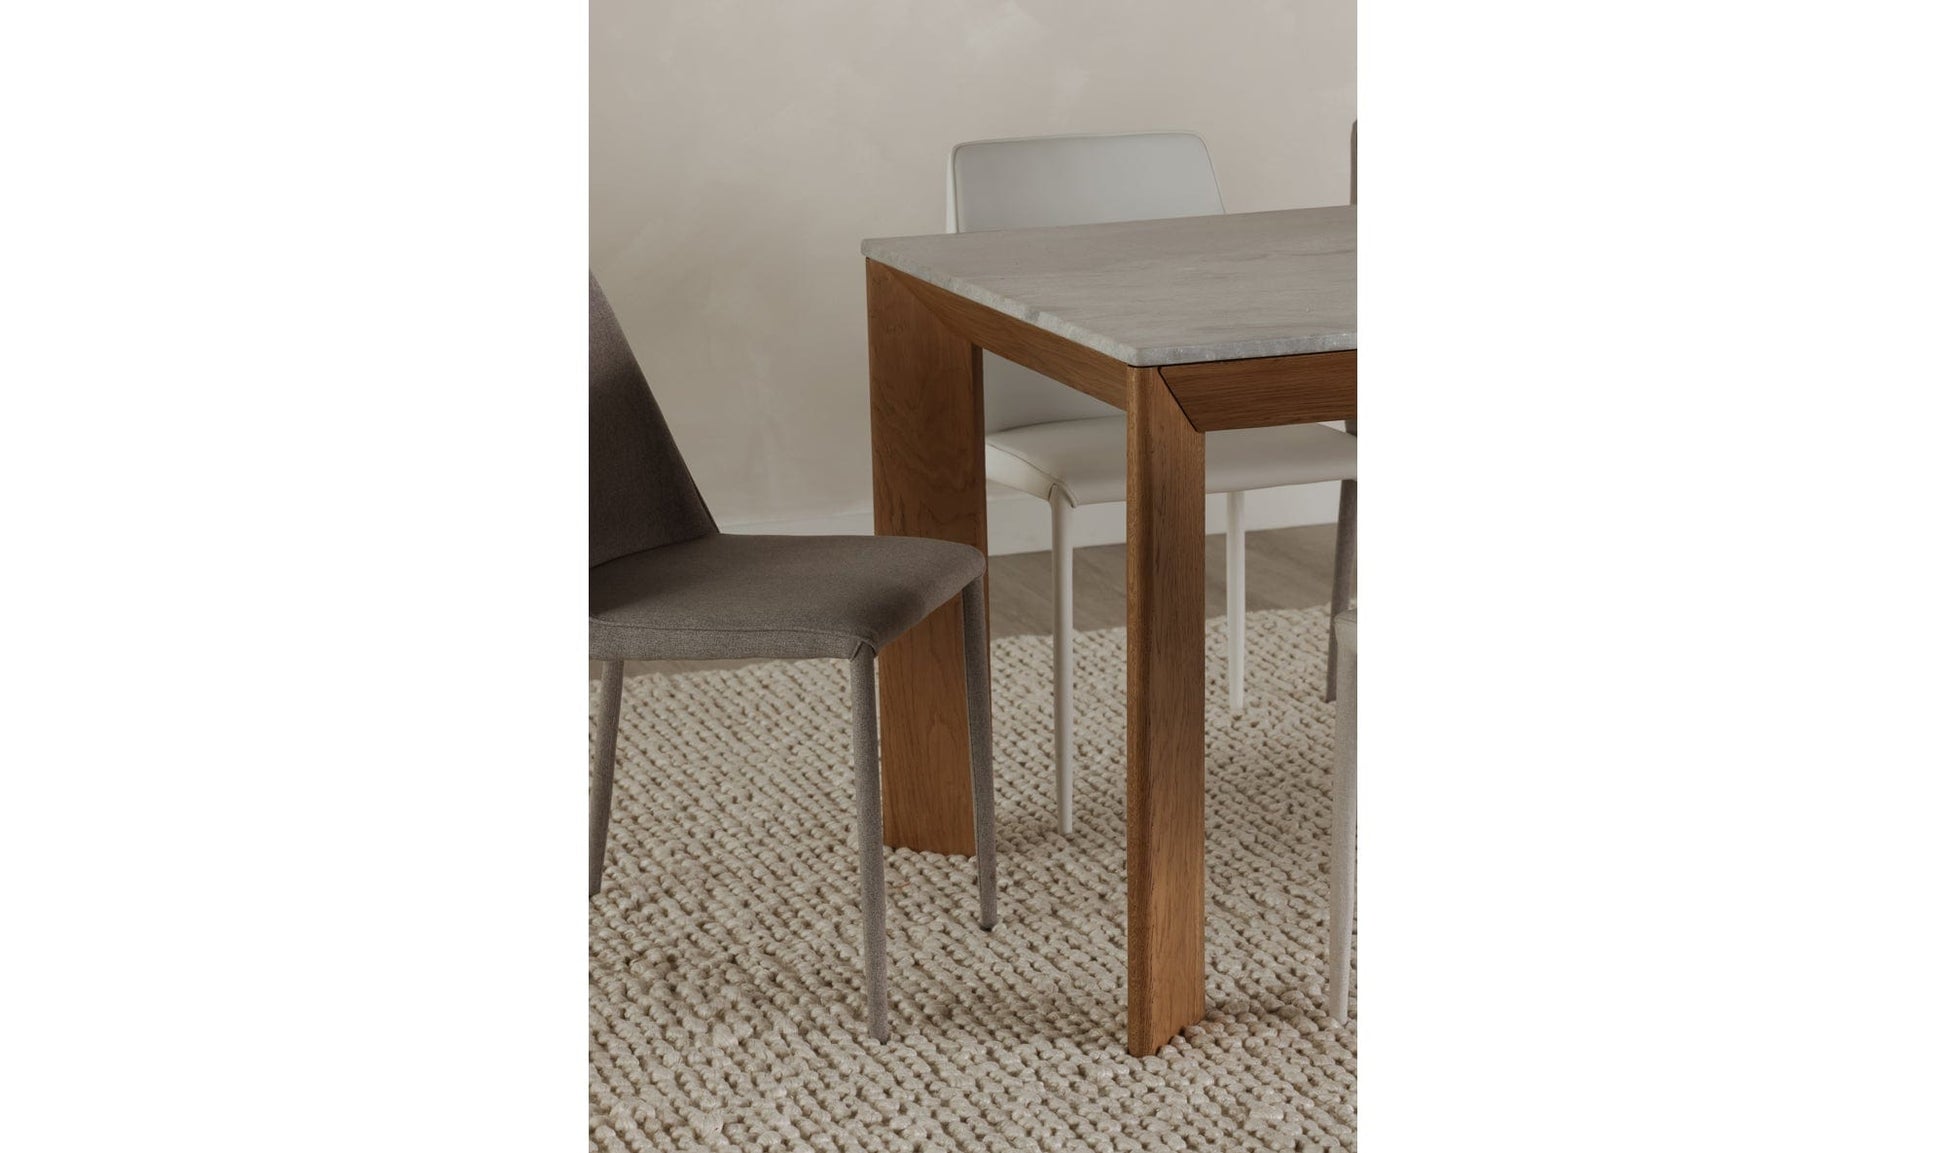 Moe's ANGLE MARBLE DINING RECTANGULAR TABLE